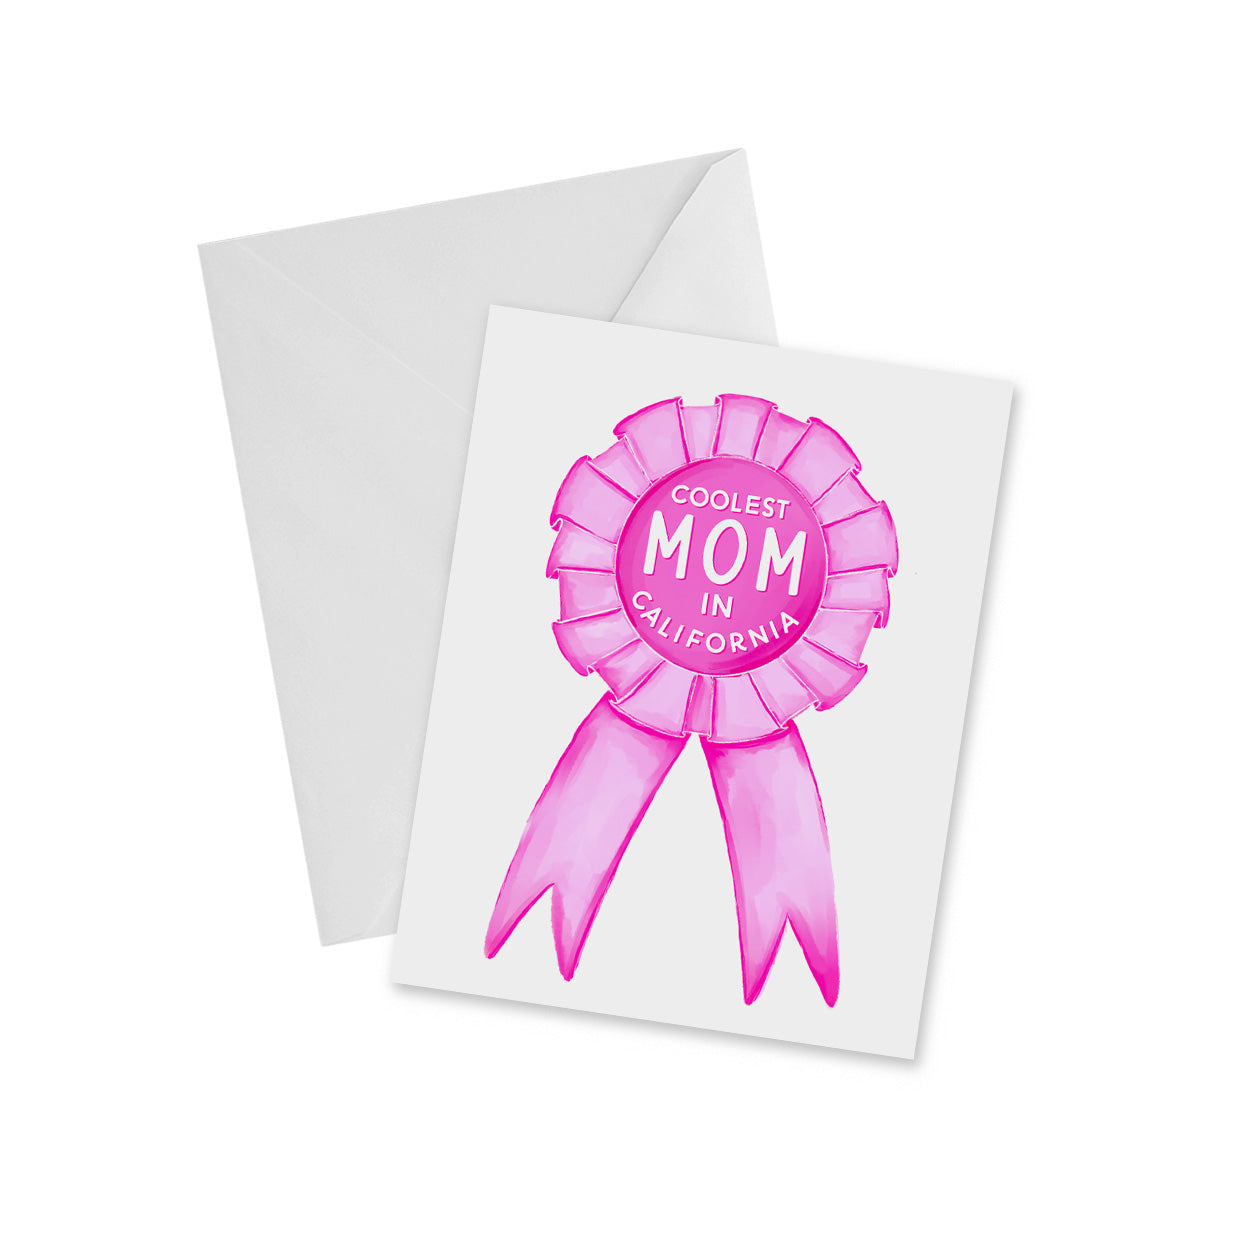 Coolest Mom in California Ribbon - Notecard